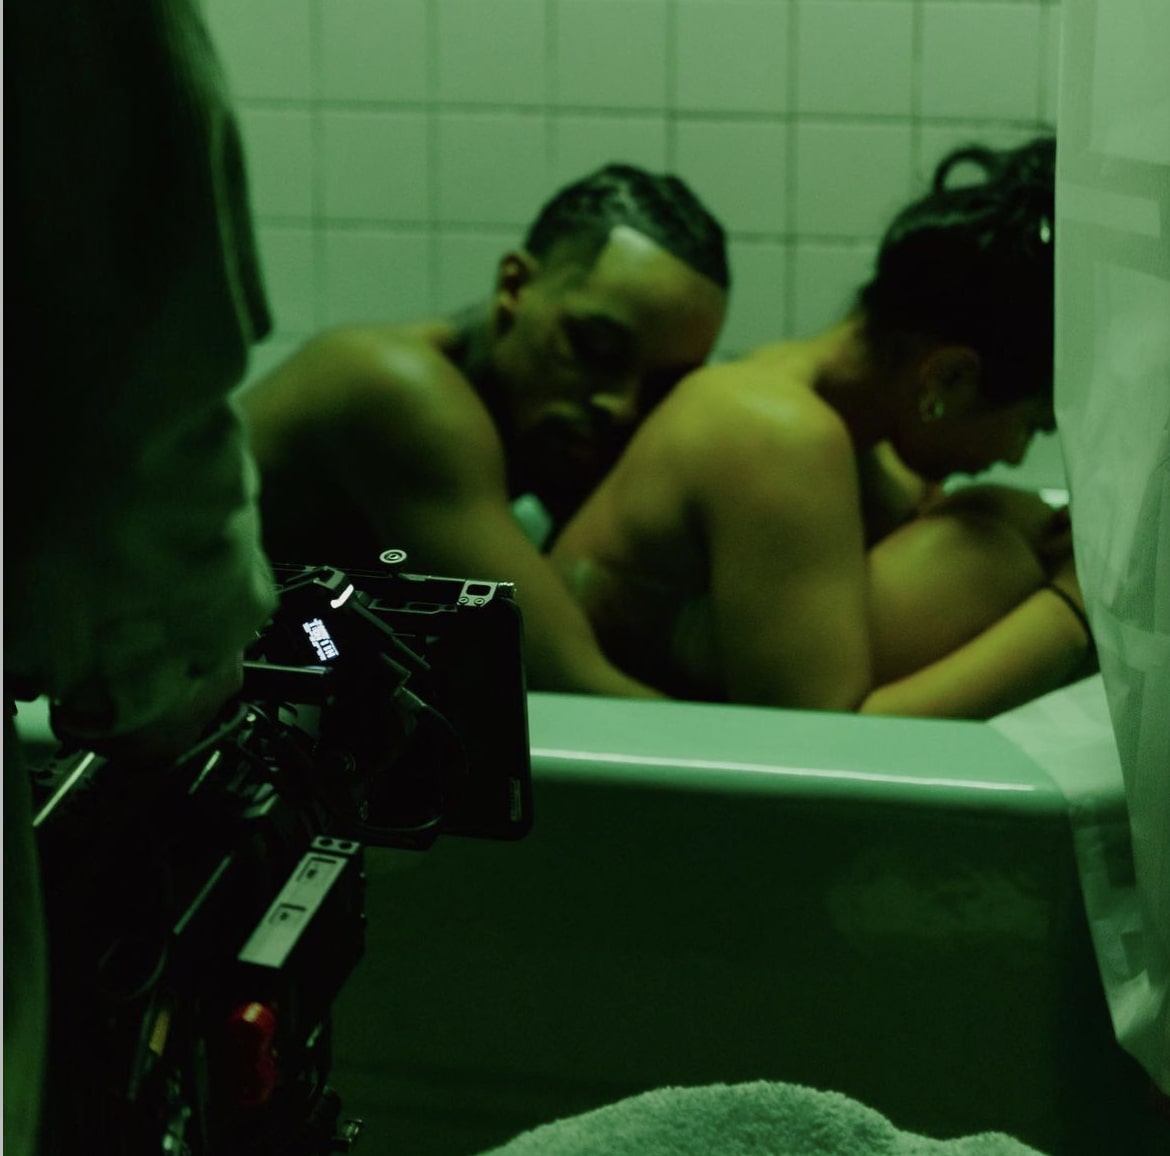 Girl and boy sitting together in bathtub, where we see a camera in bottom left foreground to show a behind the scenes look at production